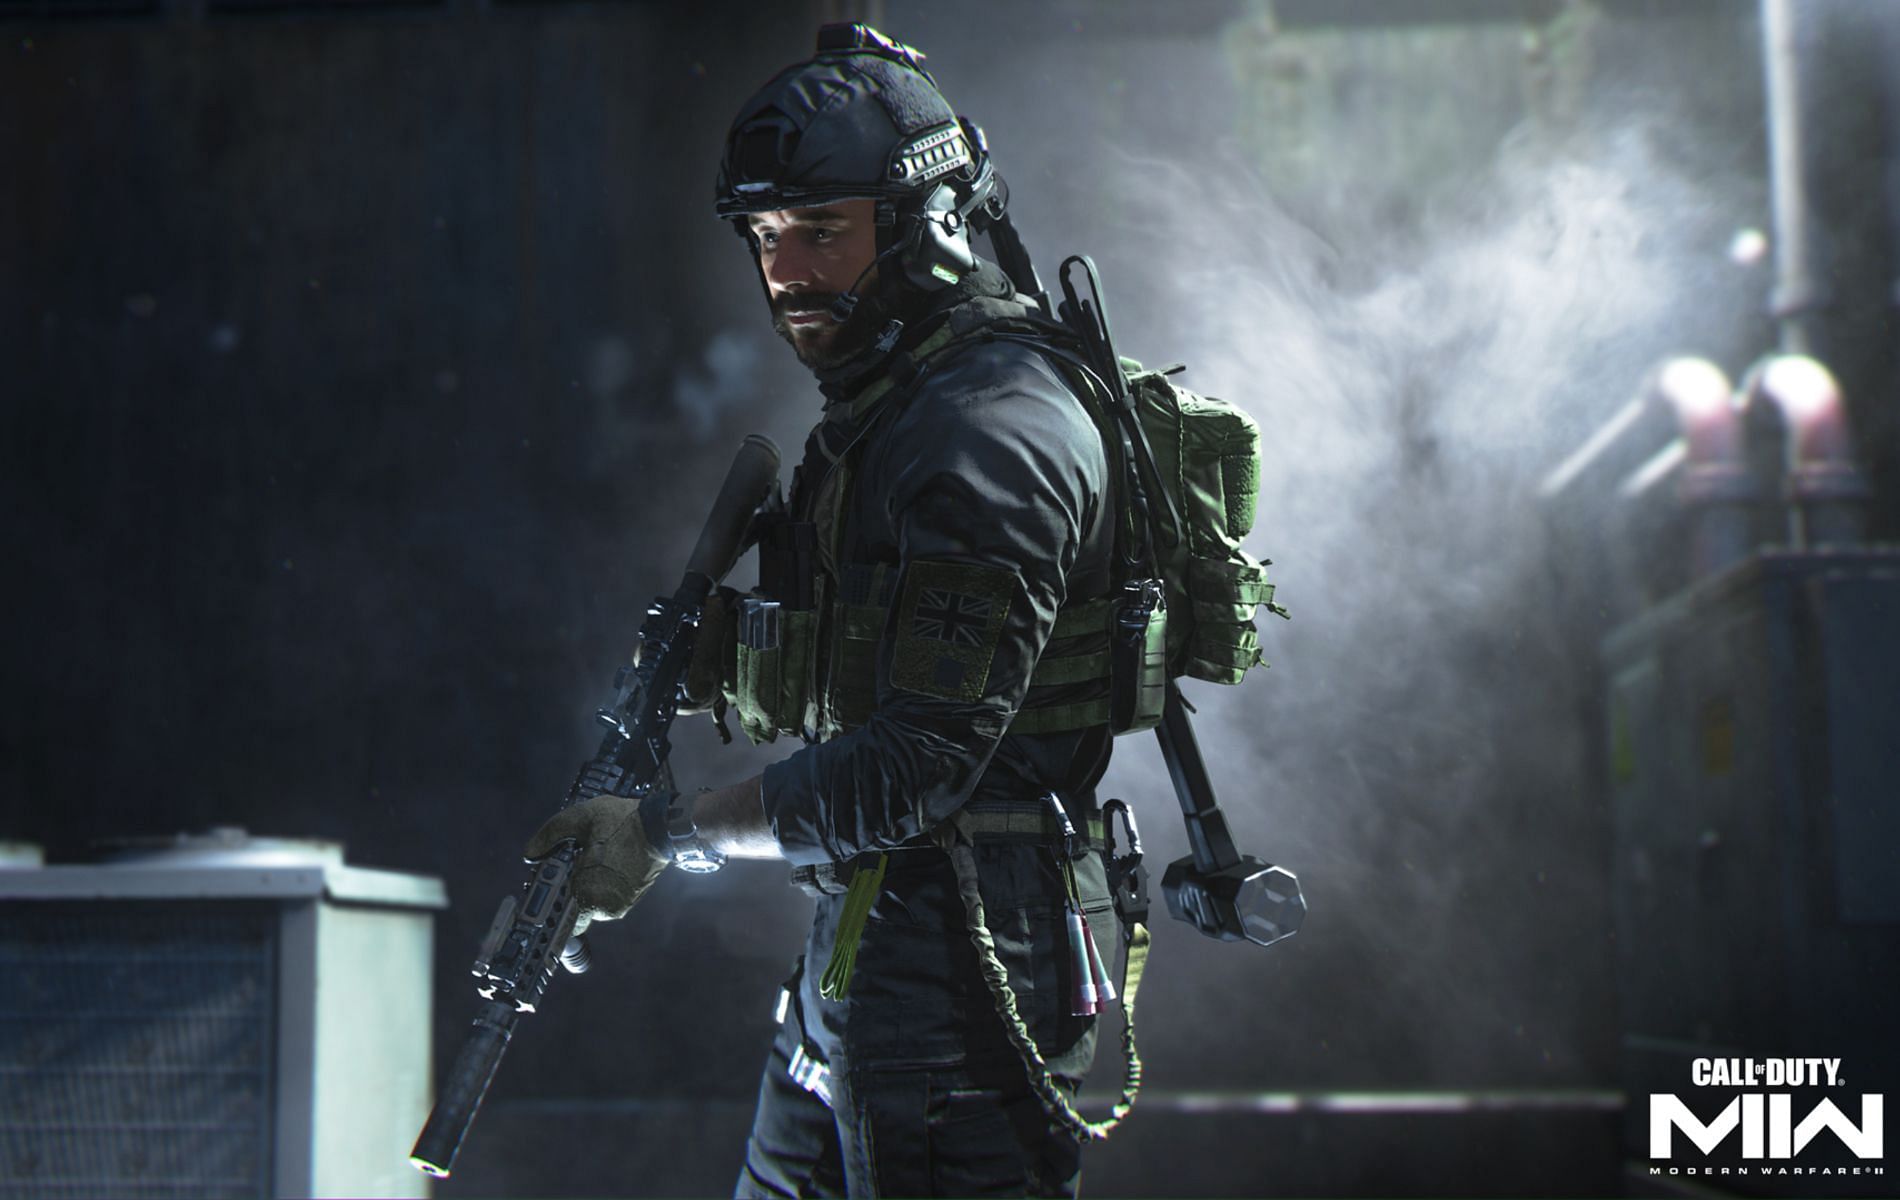 Call of Duty: Modern Warfare 2 Campaign Remastered Trailer Leaks